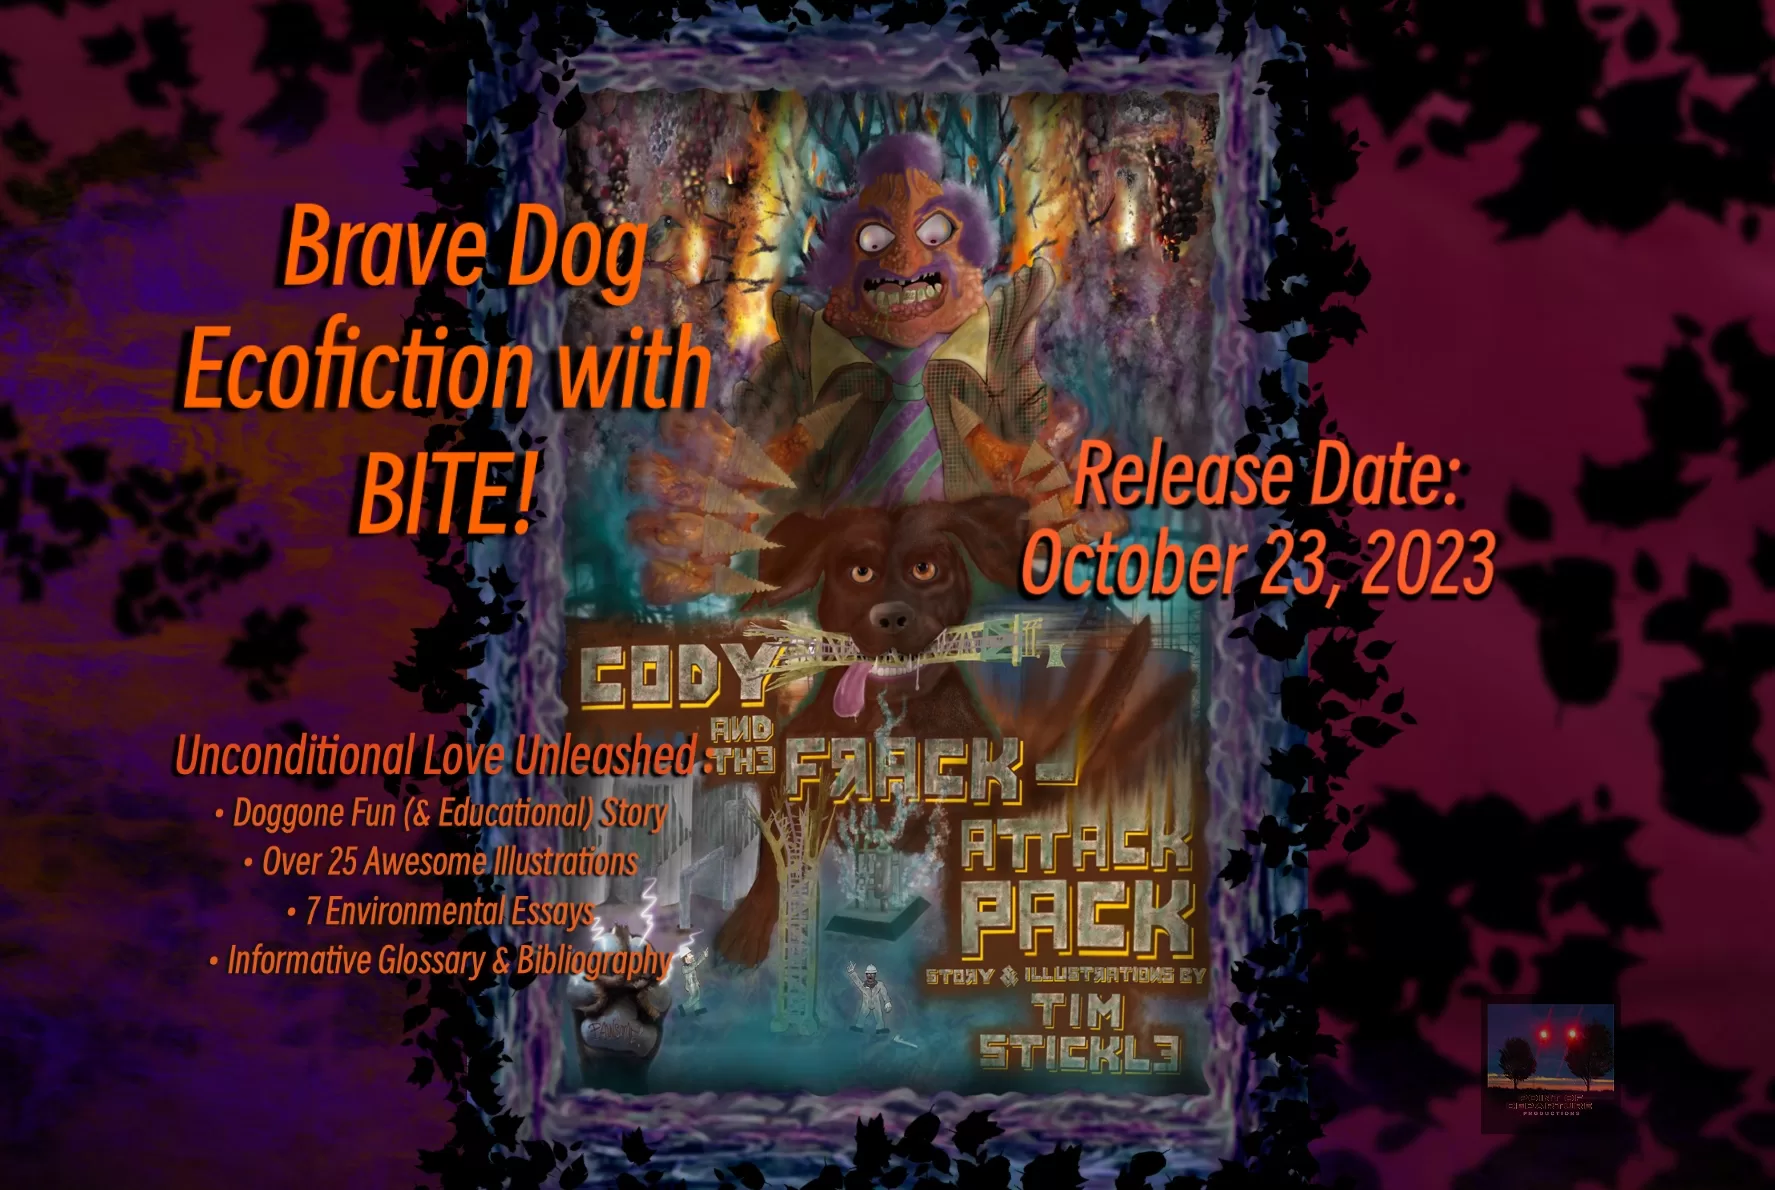 Brave Dog Ecofiction releases on October 23, 2023.